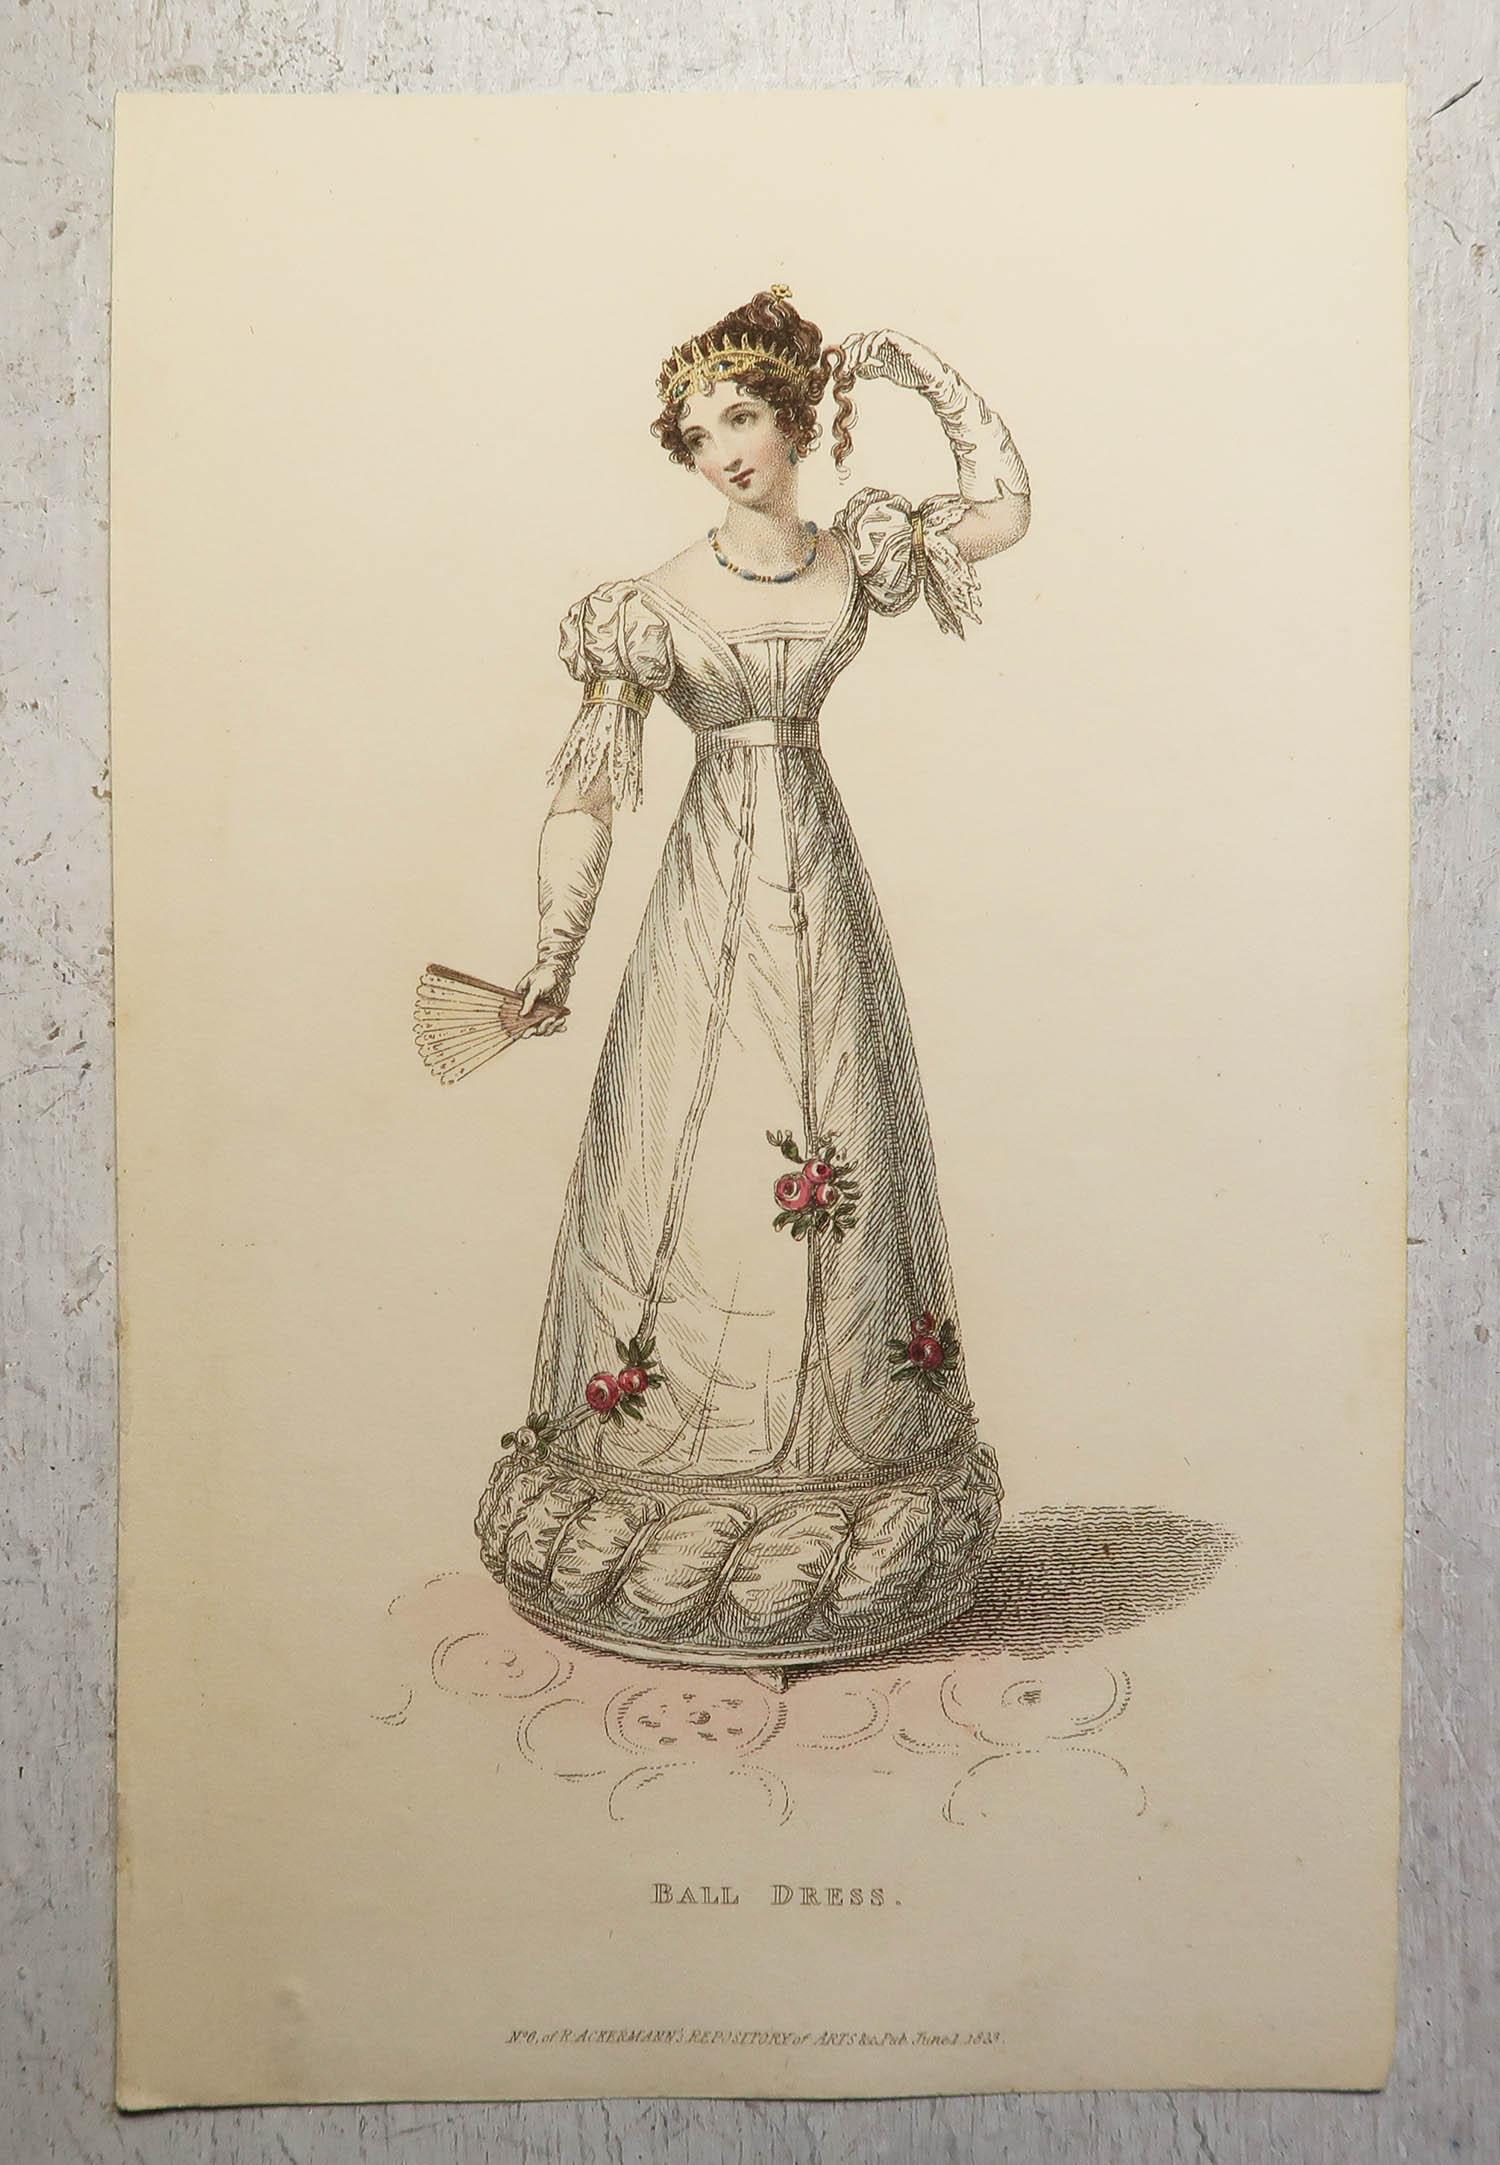 Delightful set of 18 fashion prints

Lovely pastel colors

Lithographs with original hand color

Published by Ackermann, London

Mostly dated 1809. Some 1823

Unframed.

The measurement given is the paper size of one print.







